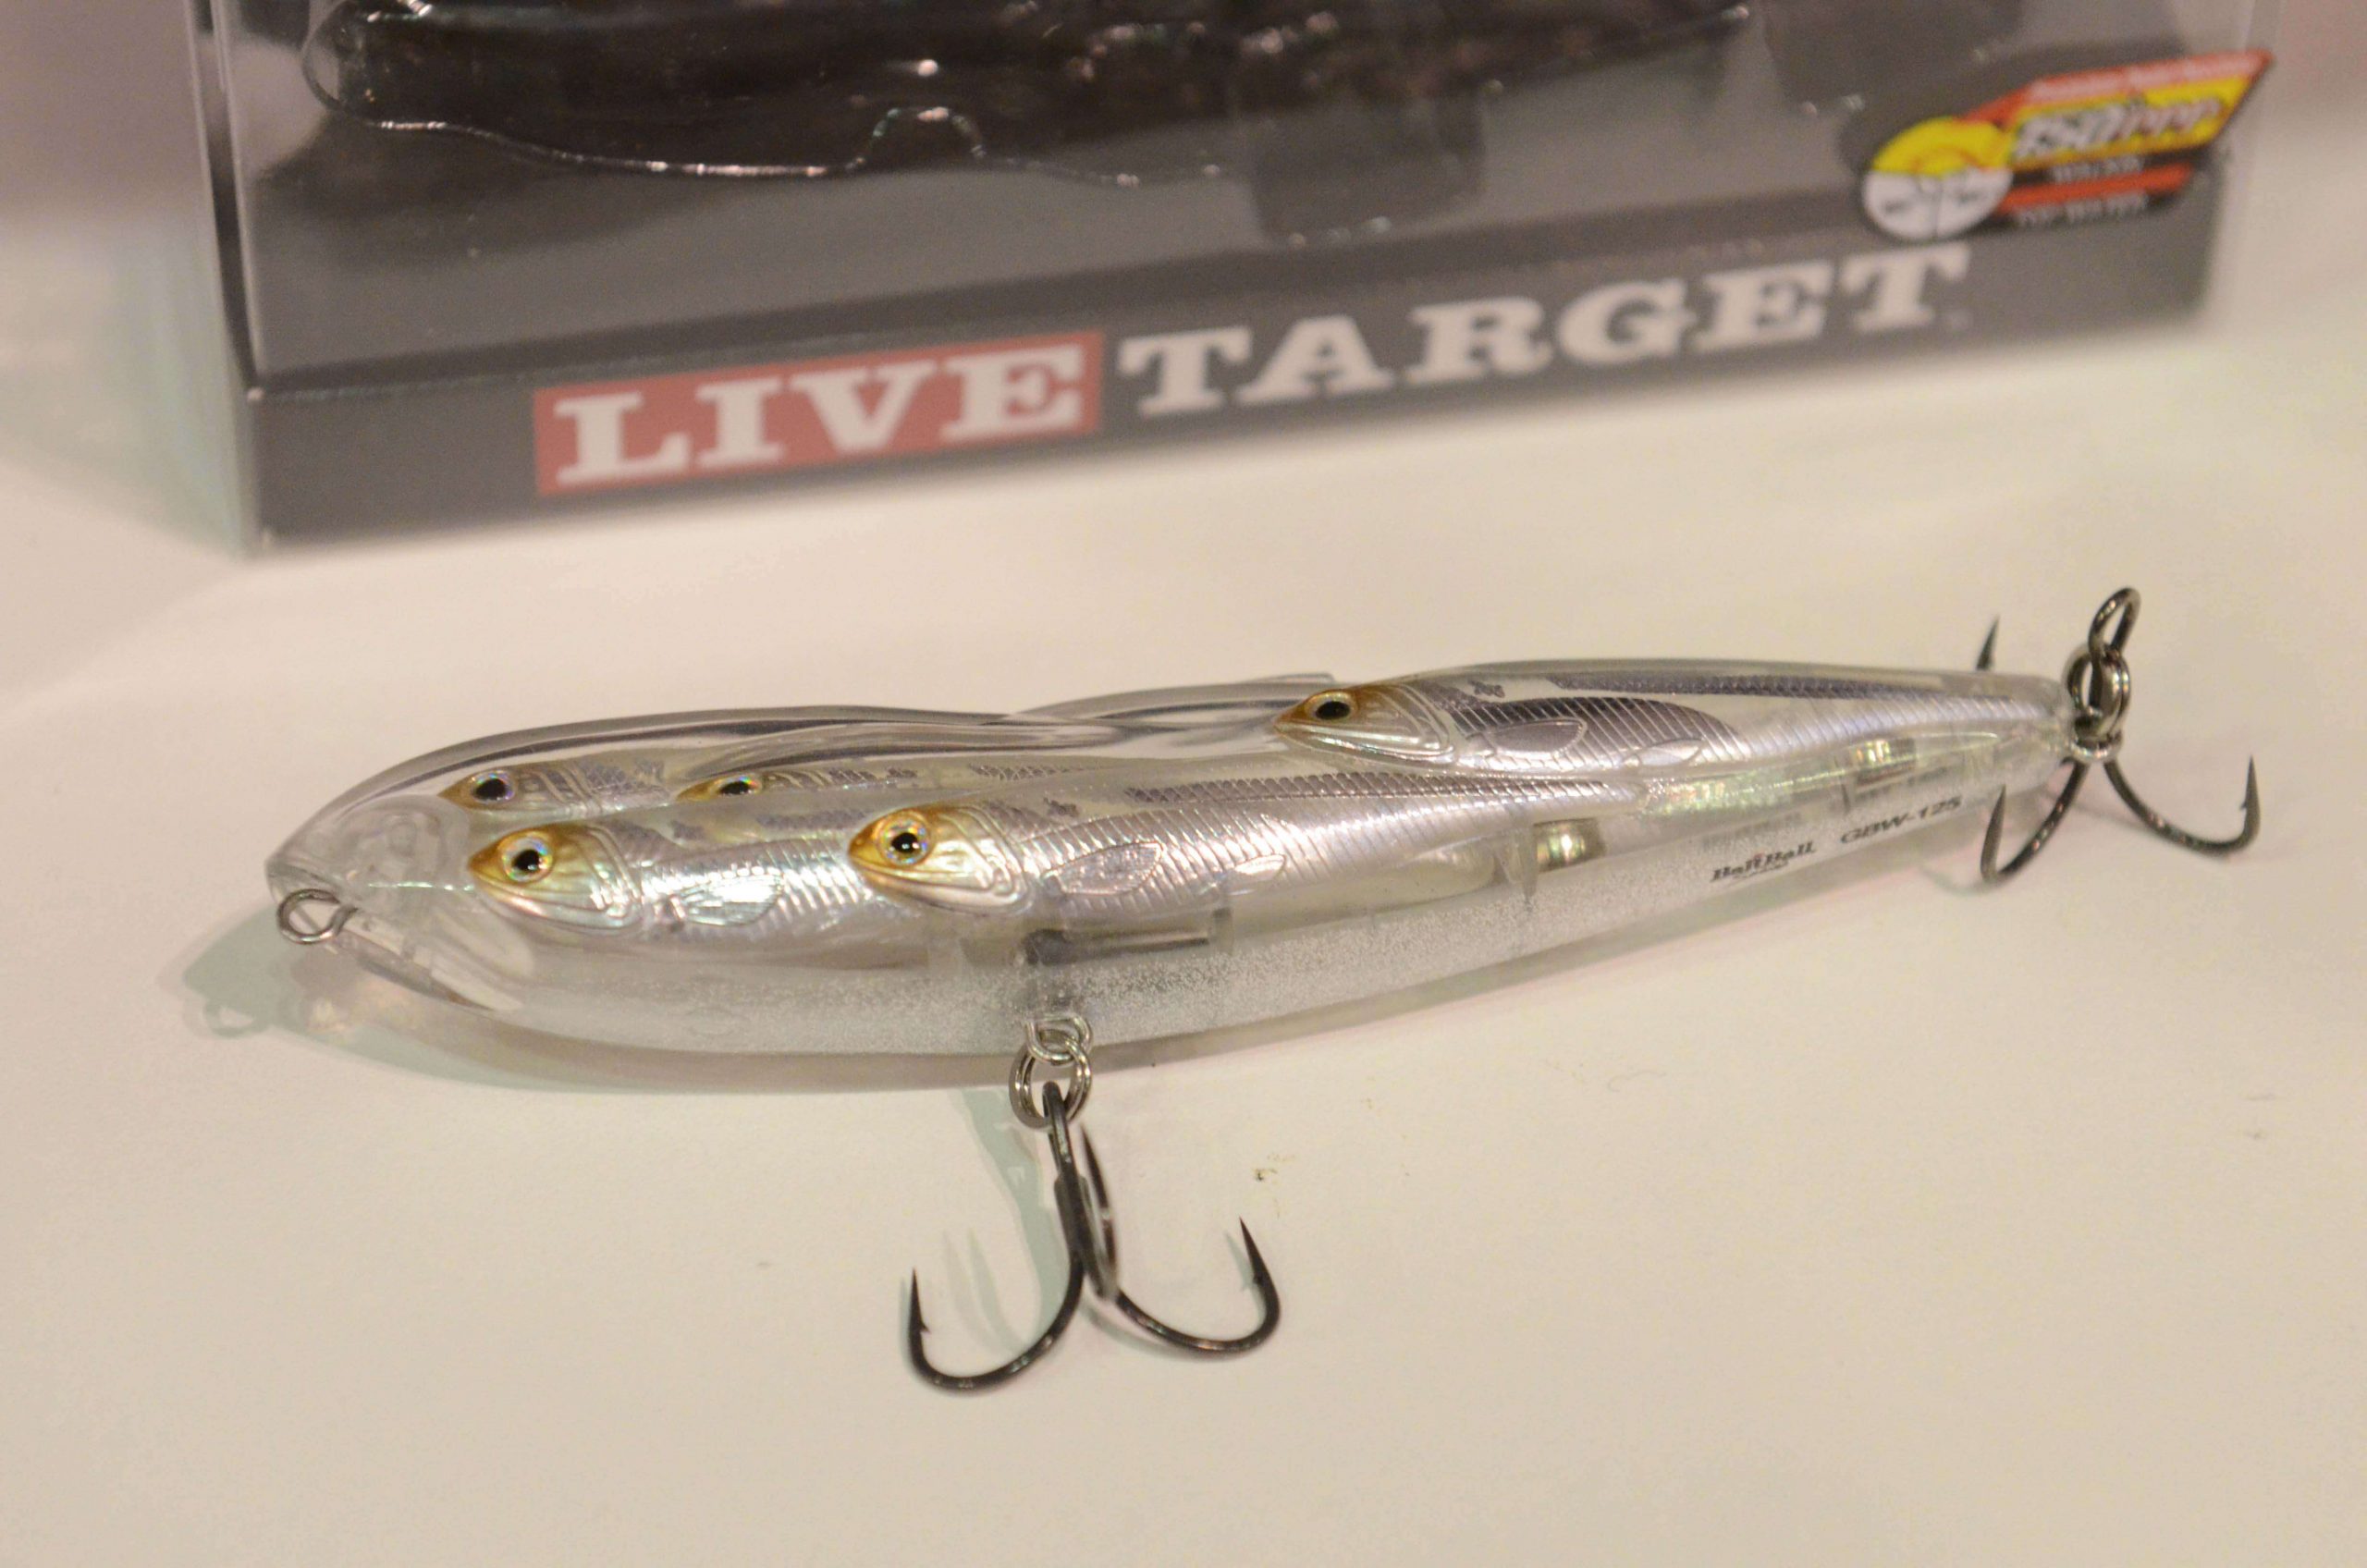 But back to the bait...here is a large hard lure from LIVETARGET.